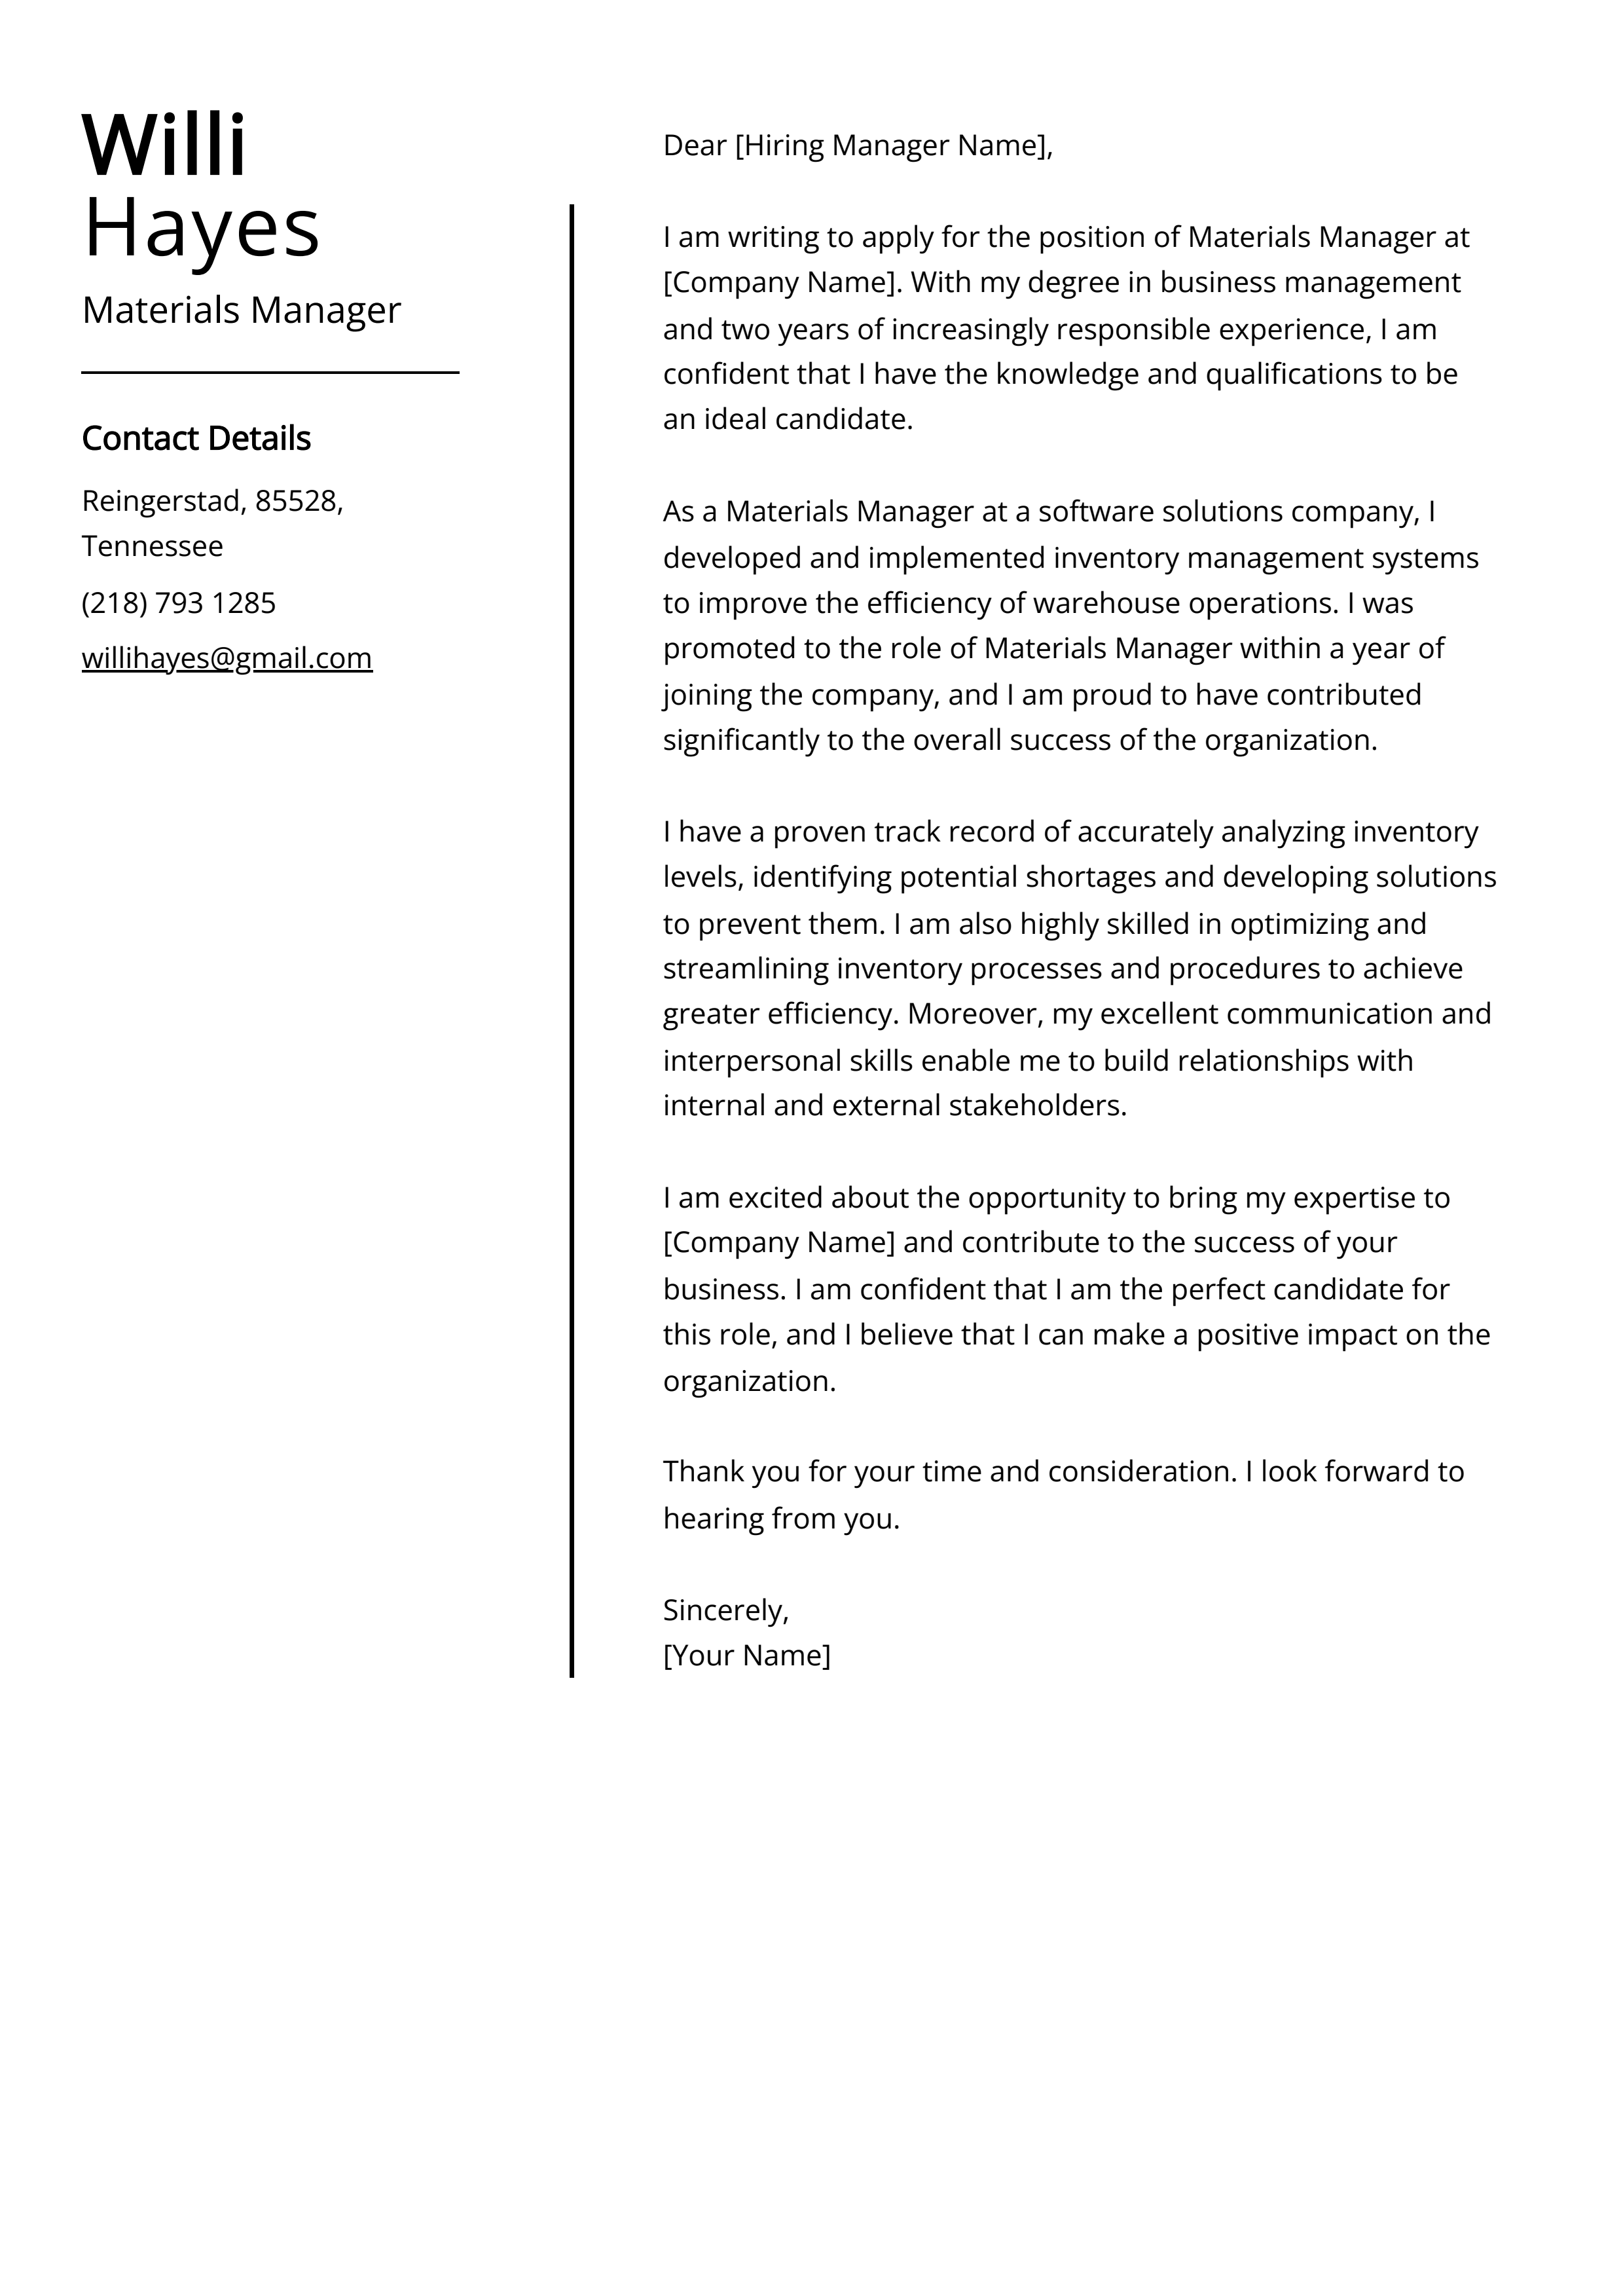 Materials Manager Cover Letter Example